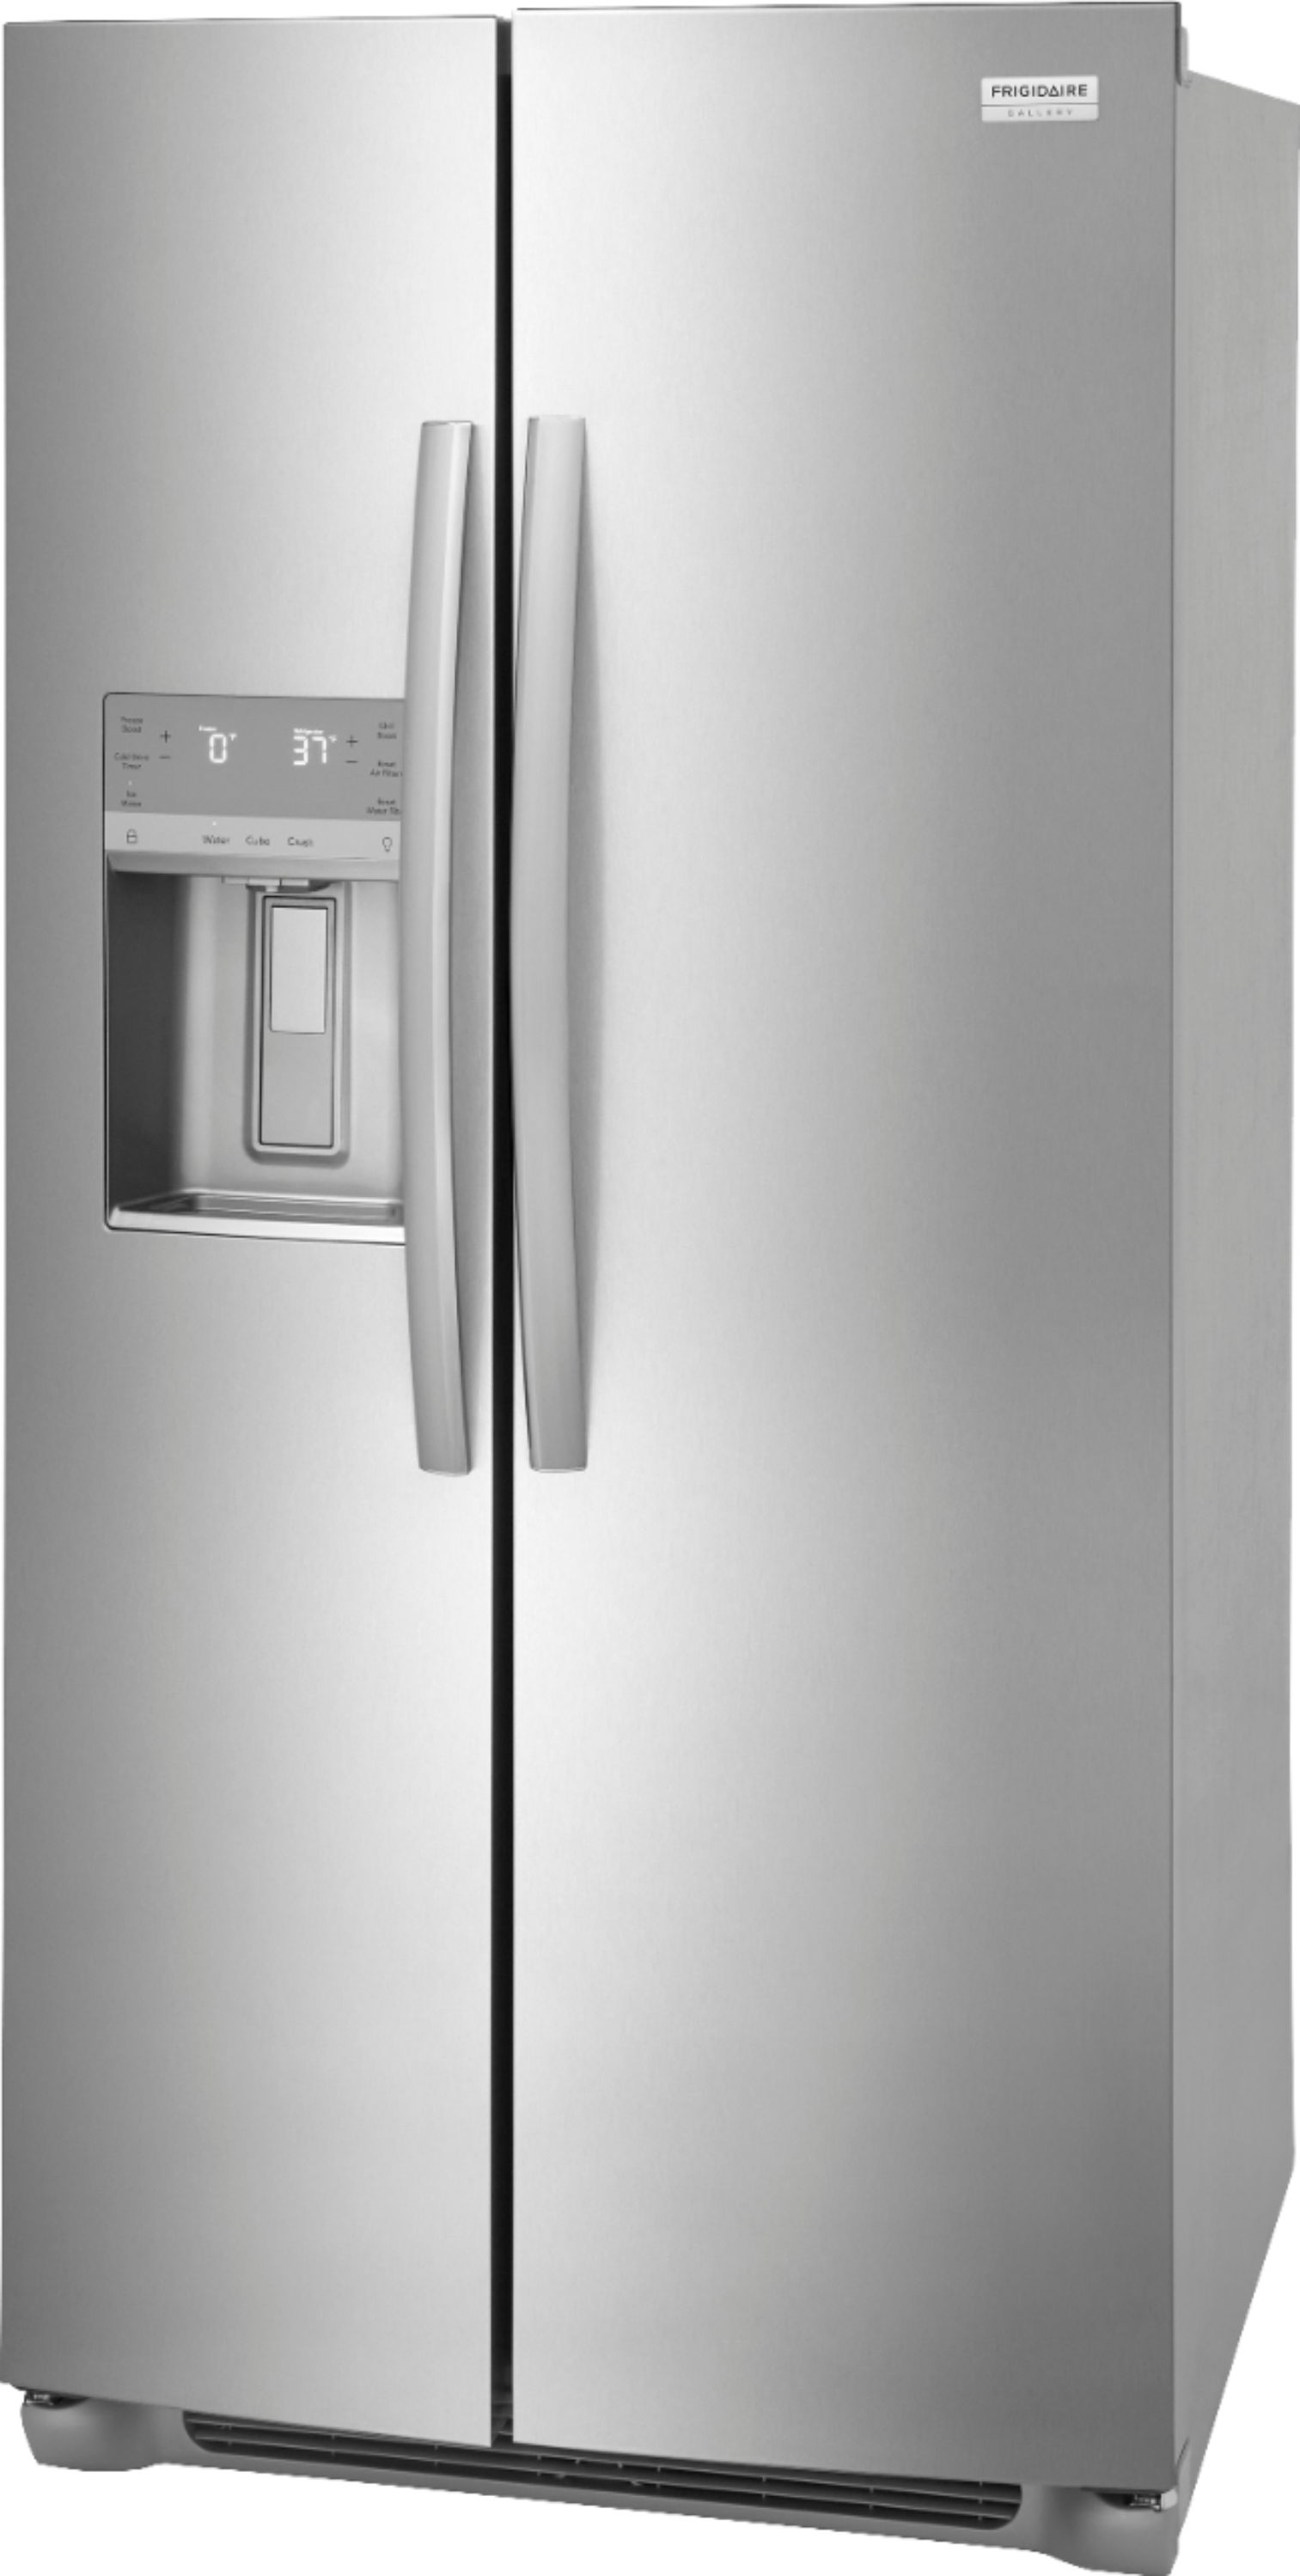 Left View: Frigidaire - Gallery 22.3 Cu. Ft. Side-by-Side Counter-Depth Refrigerator - Stainless steel